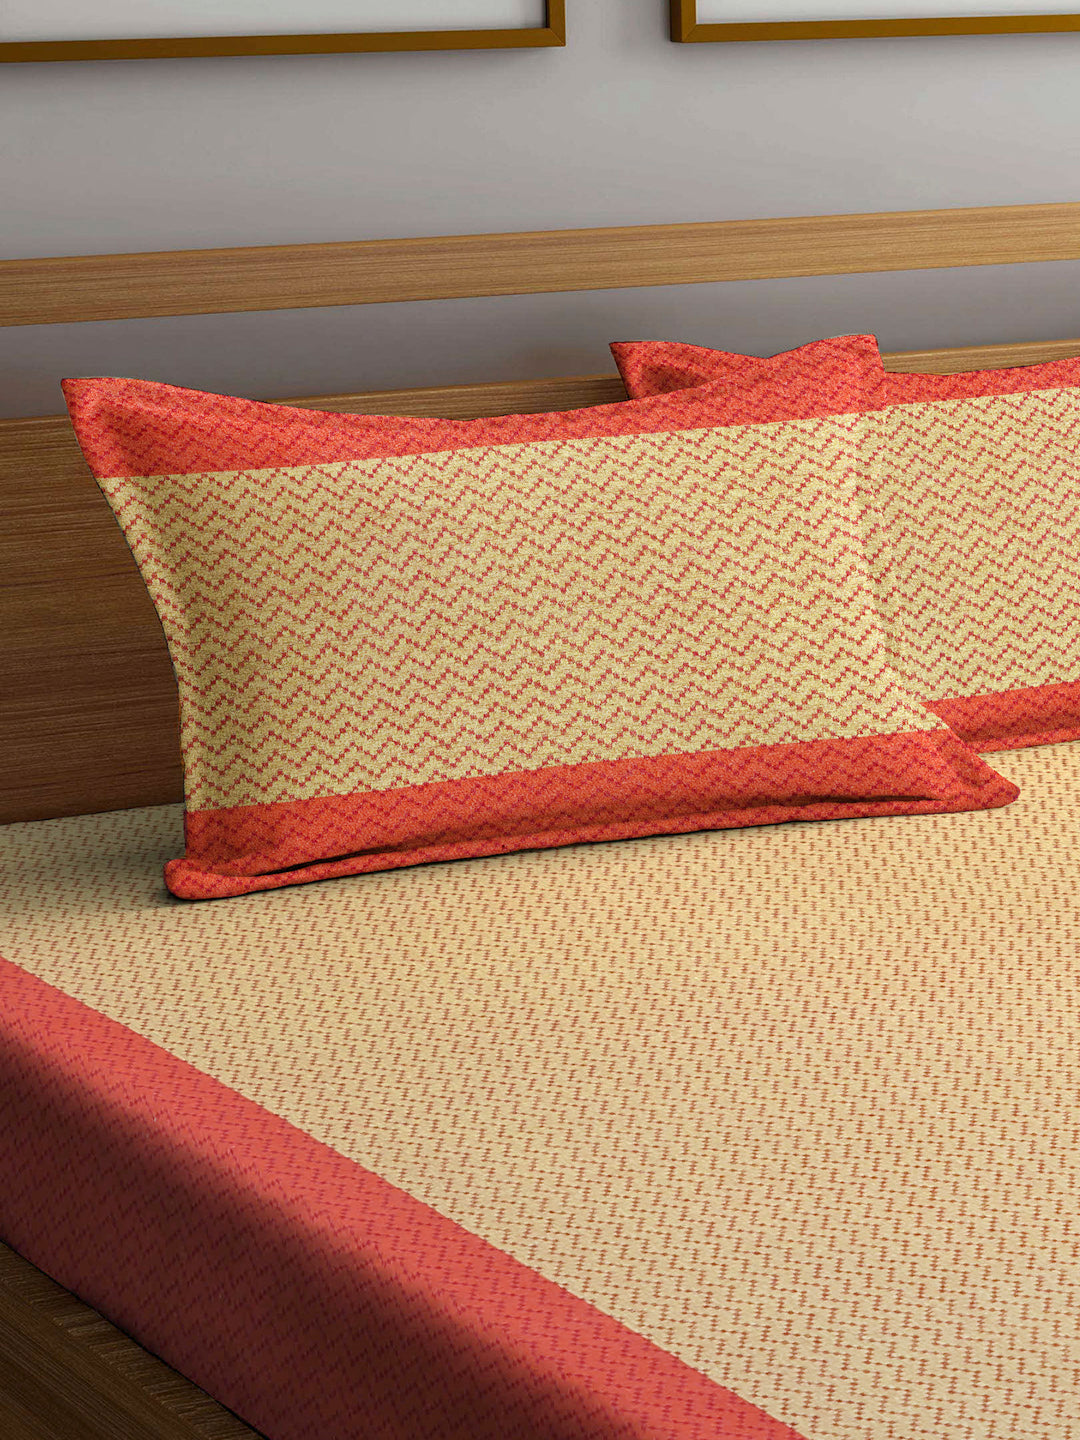 Arrabi Red Stripes Handwoven Cotton King Size Bedsheet with 2 Pillow Covers (260 X 230 cm)